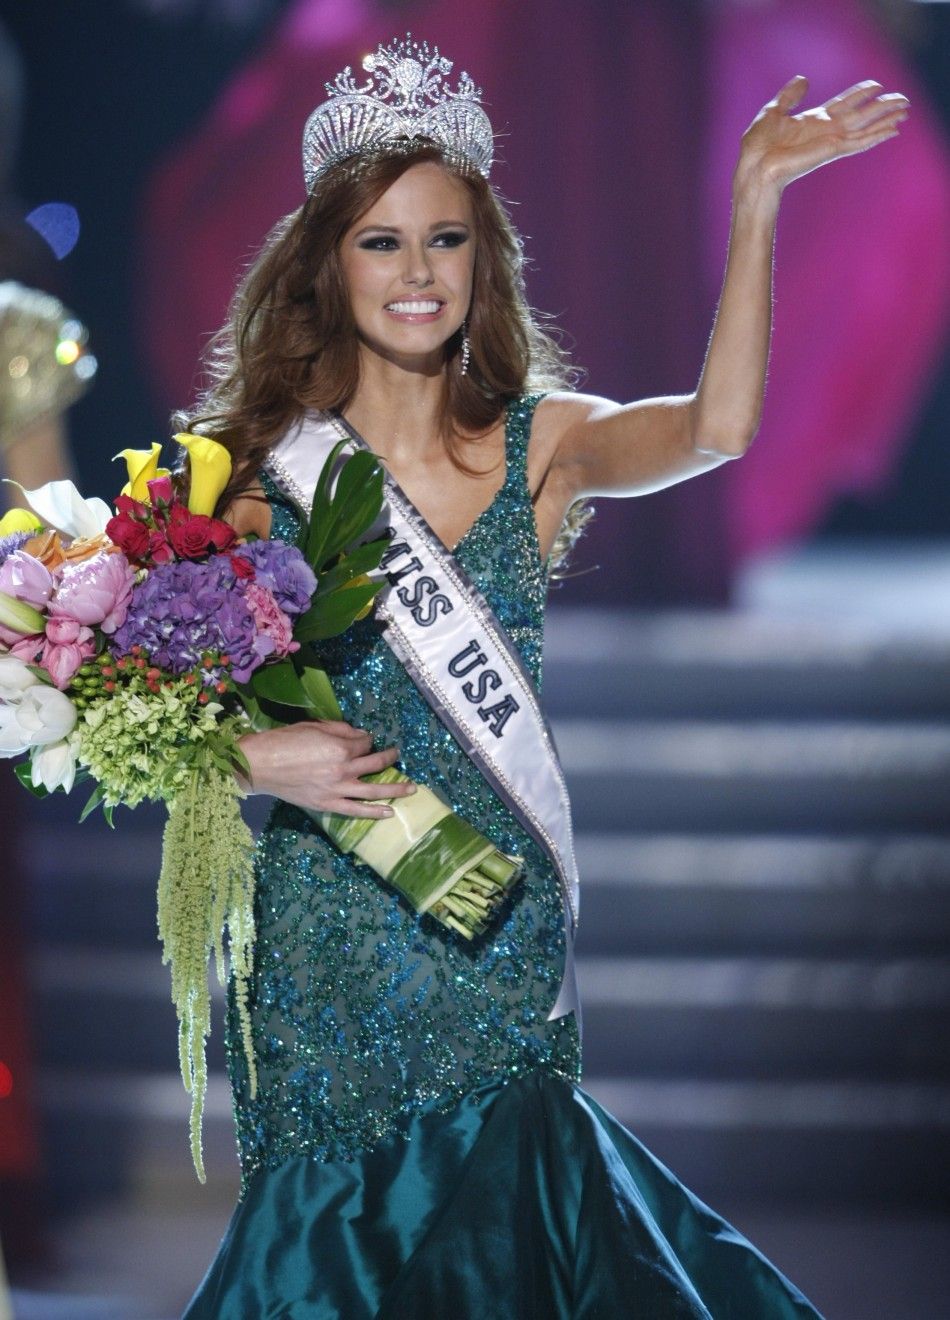 Miss California Alyssa Campanella waves after being crowned Miss USA 2011 during the Miss USA pageant in the Theatre for the Performing Arts at Planet Hollywood Hotel and Casino in Las Vegas, Nevada June 19, 2011. 